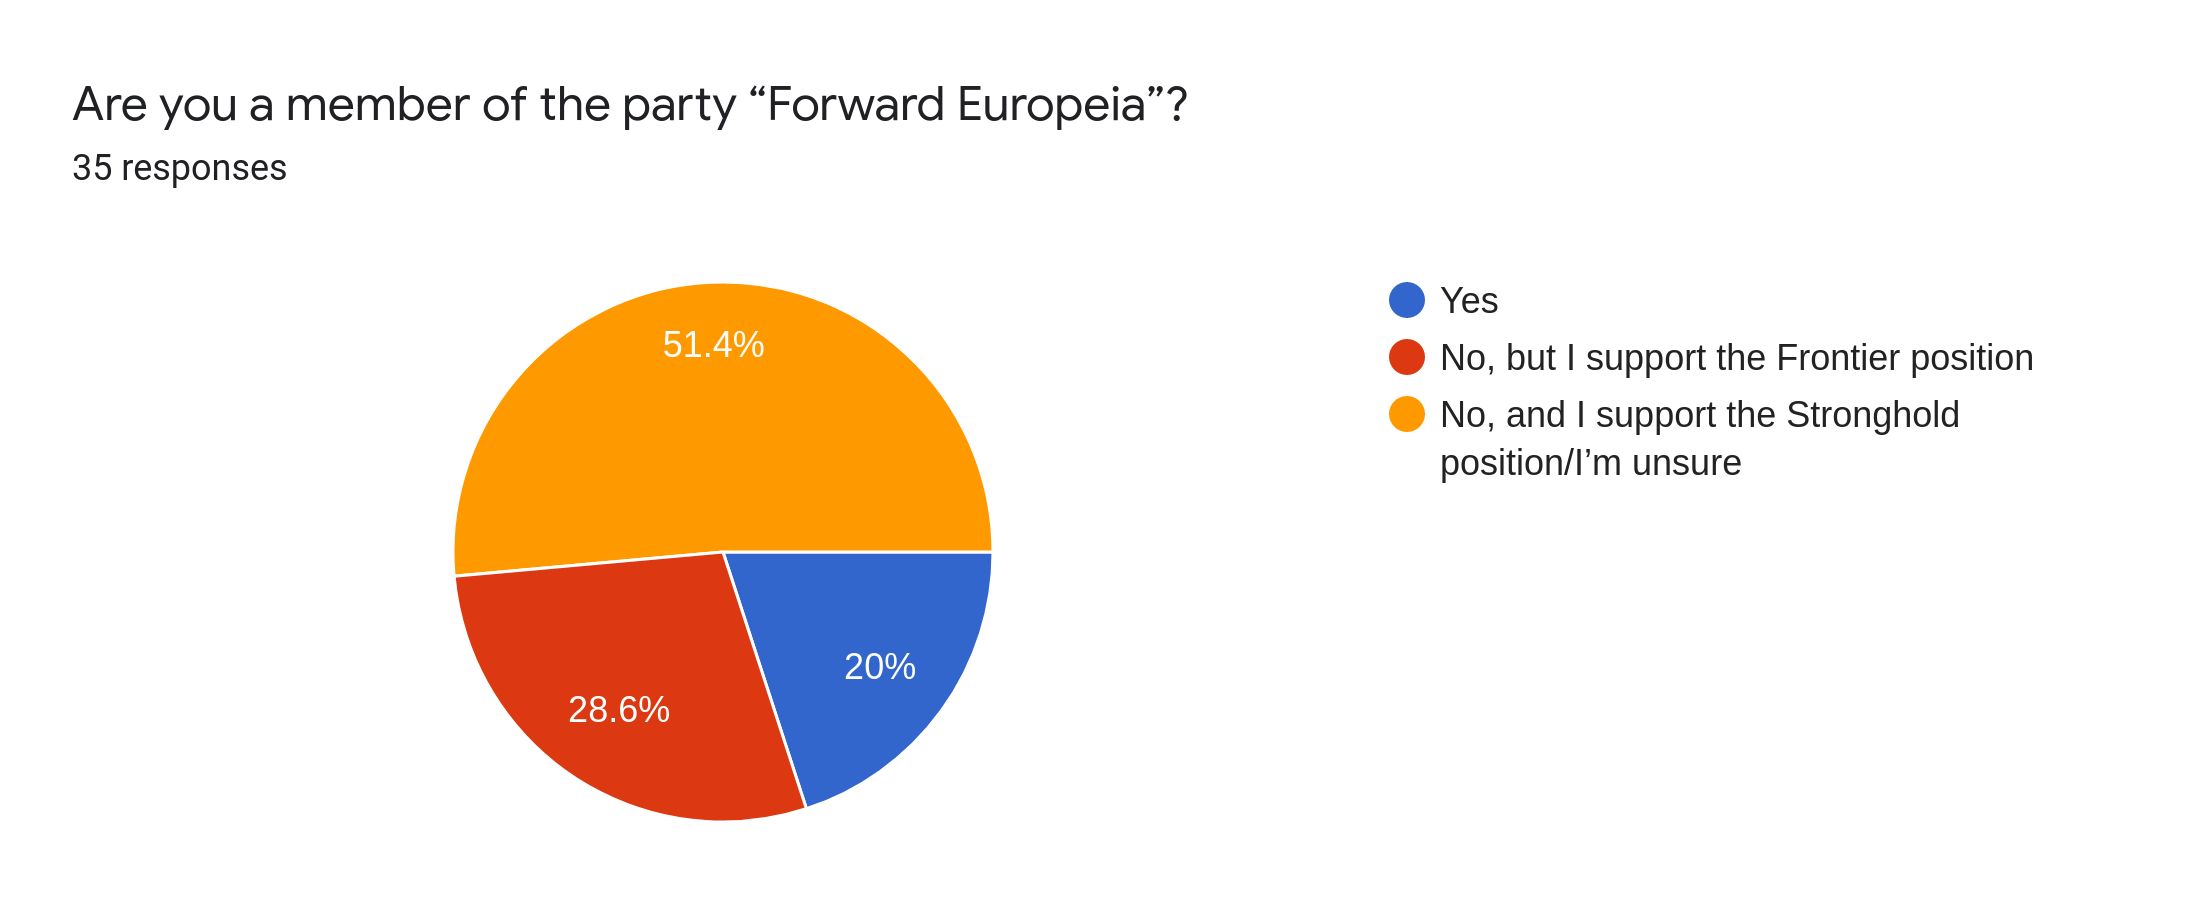 Forms response chart. Question title: Are you a member of the party “Forward Europeia”?. Number of responses: 35 responses.